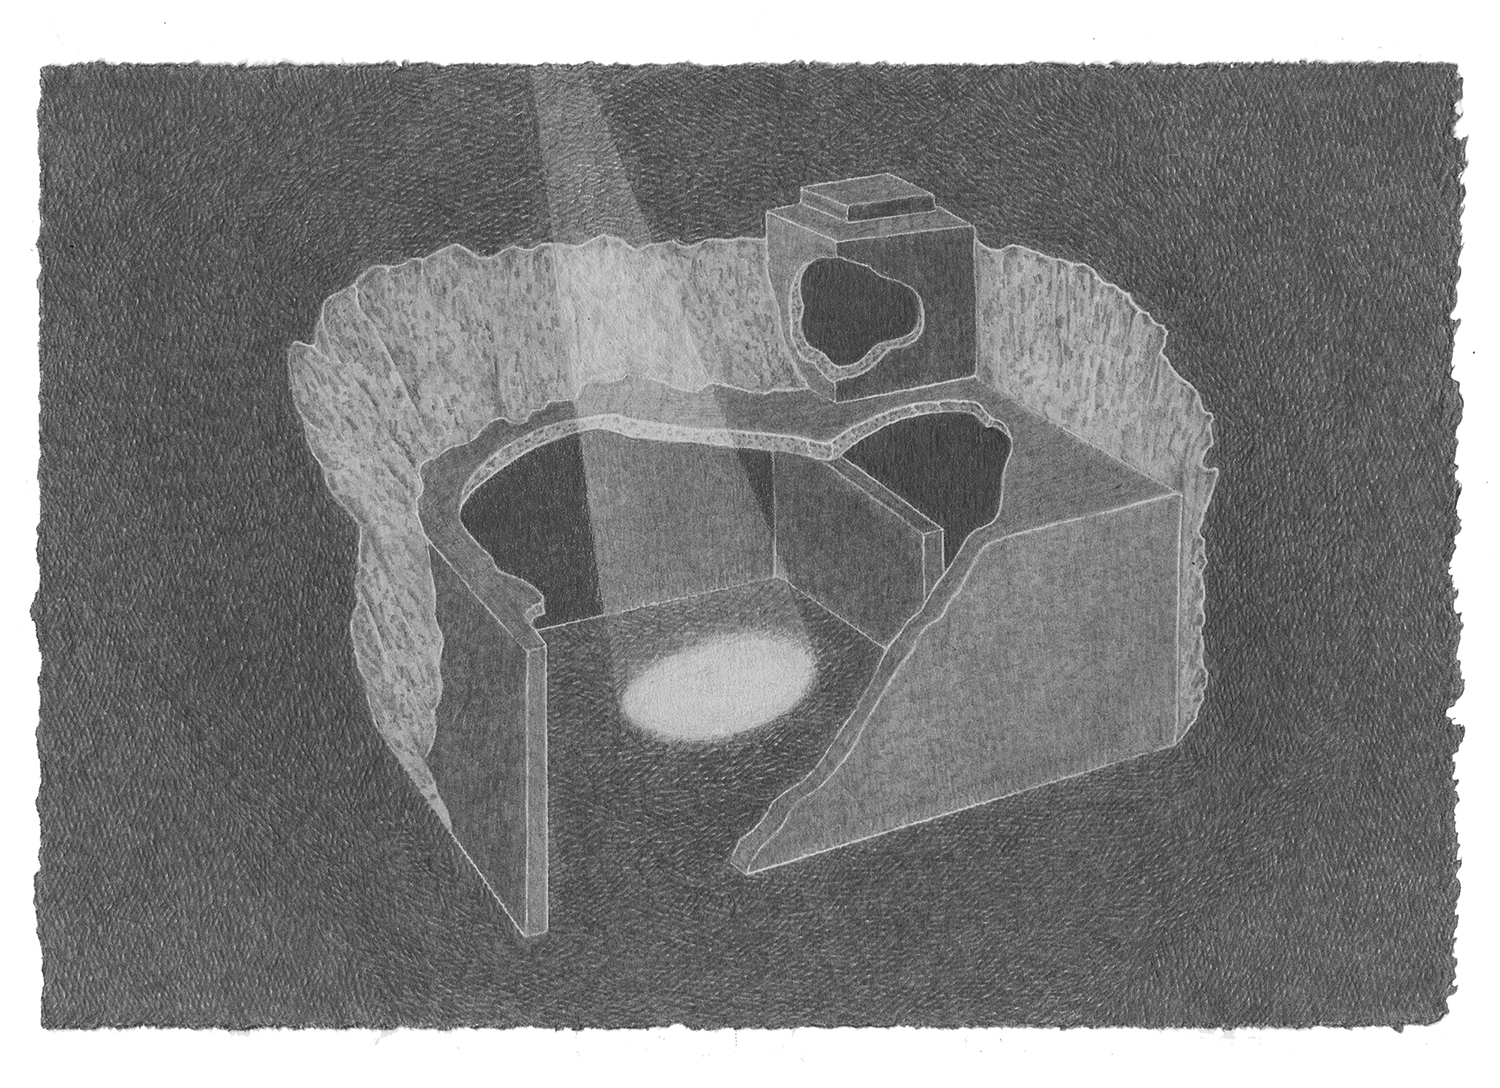 Textured drawing of a section cut rectangular structure, revealed through cut rubble underground. A spotlight appears from the center of the page and hits the center of the room.